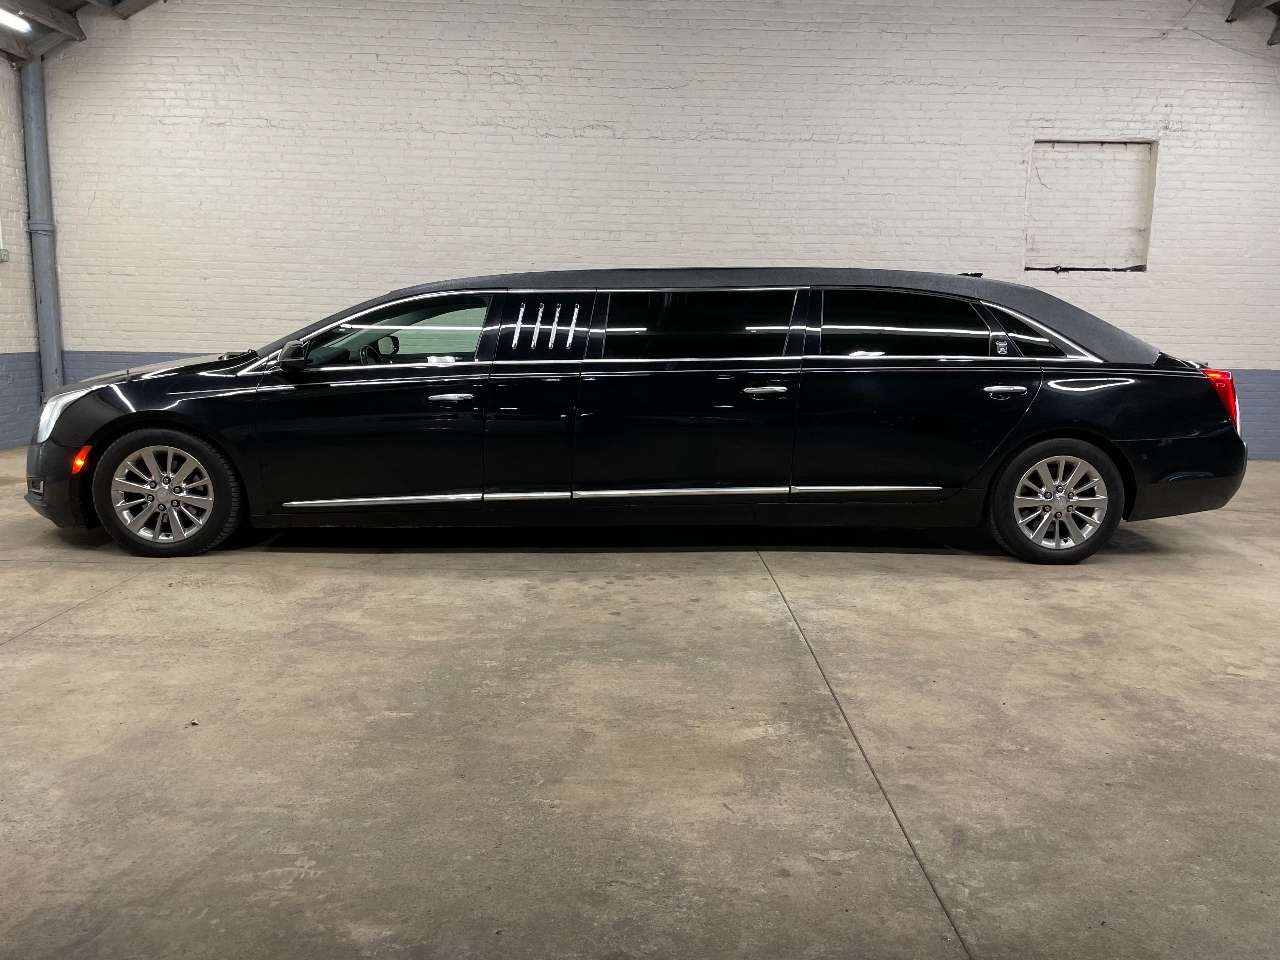 2017 Cadillac Armbruster Stageway 70   Stretch Limousine 1698348961305